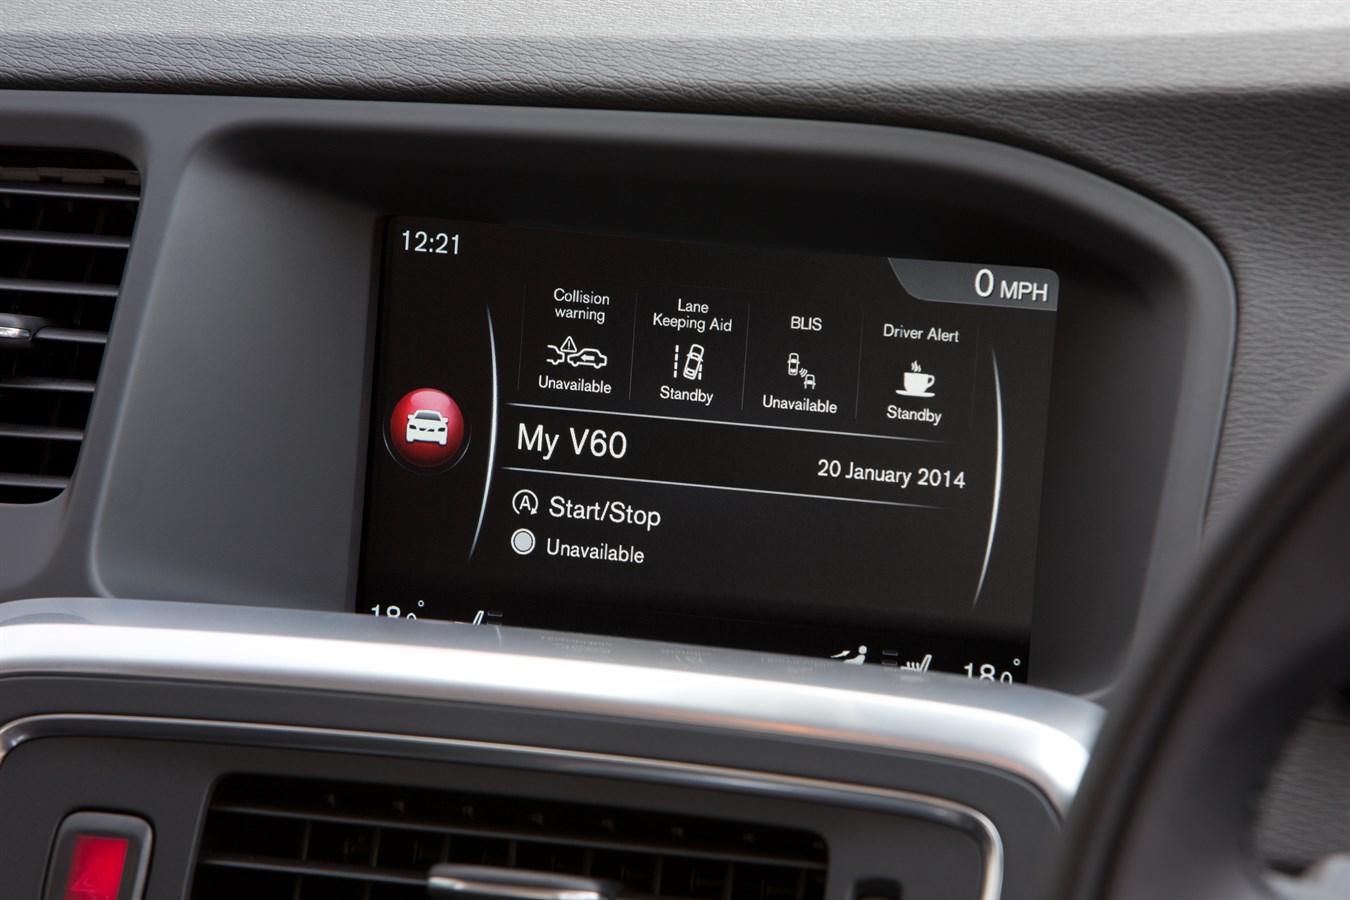 HMI (centre) screen showing options available via the My Car button